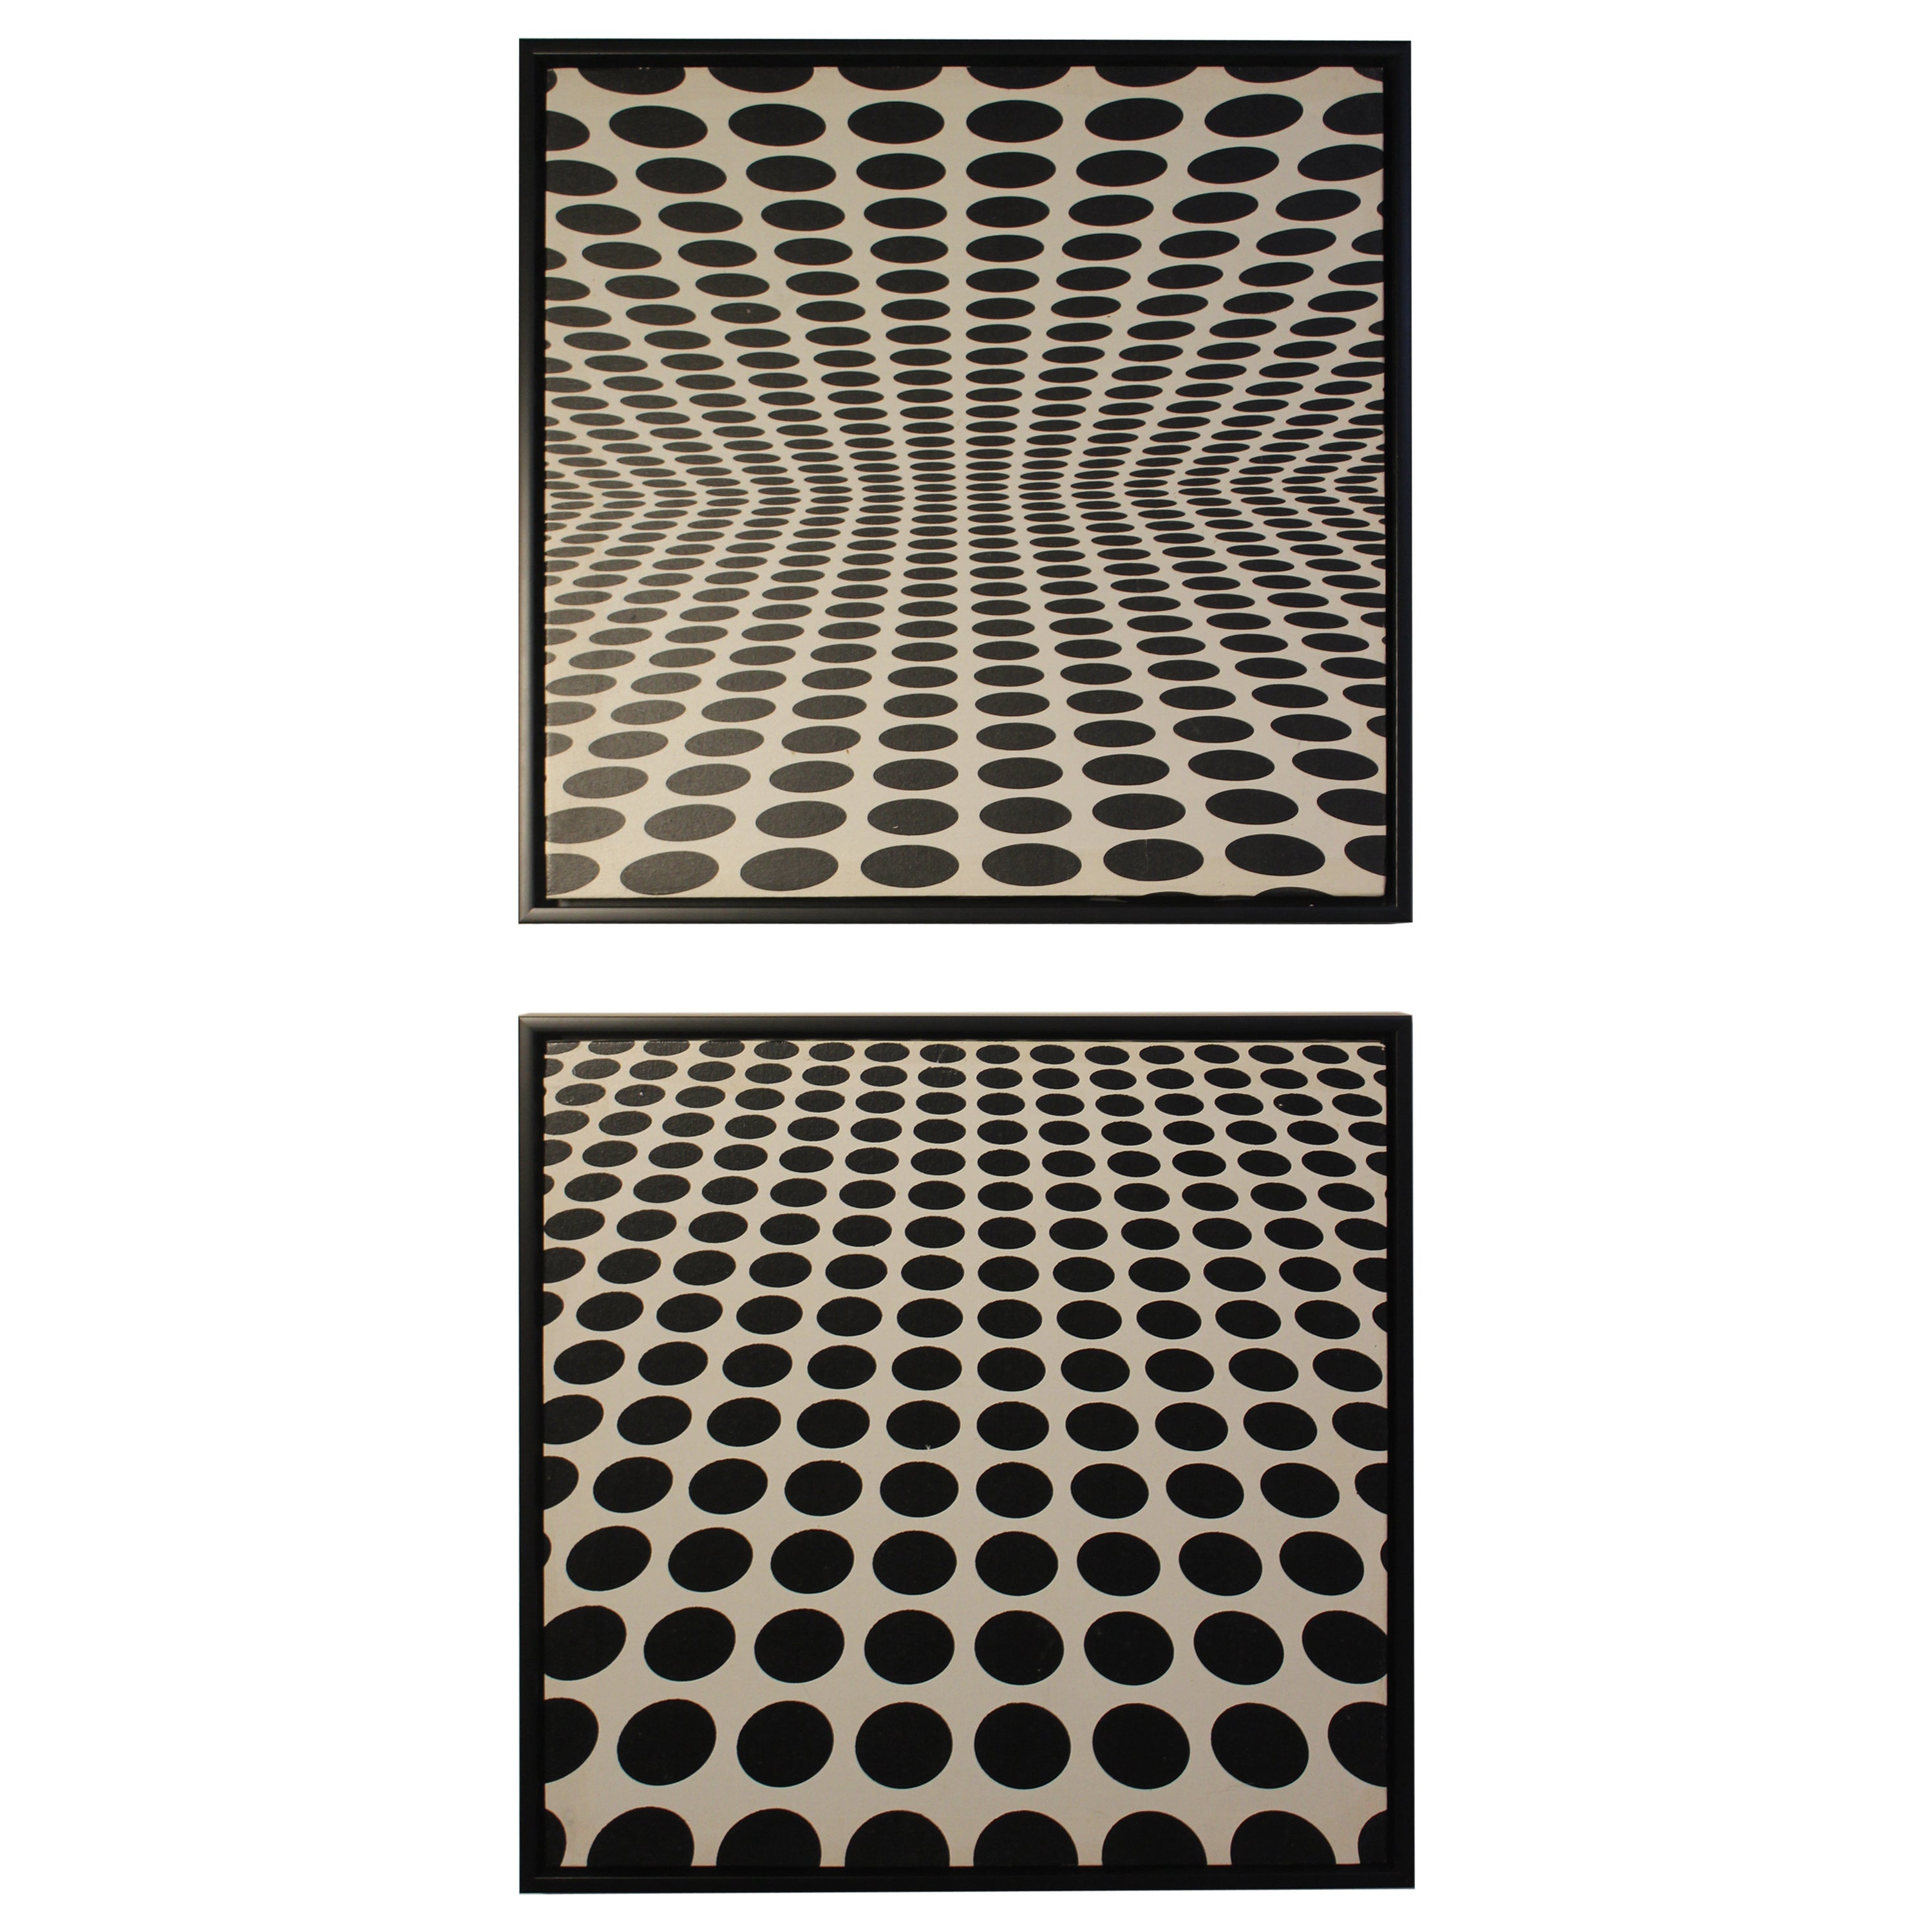 Pair of Framed 1960s Op Art Prints on Canvas